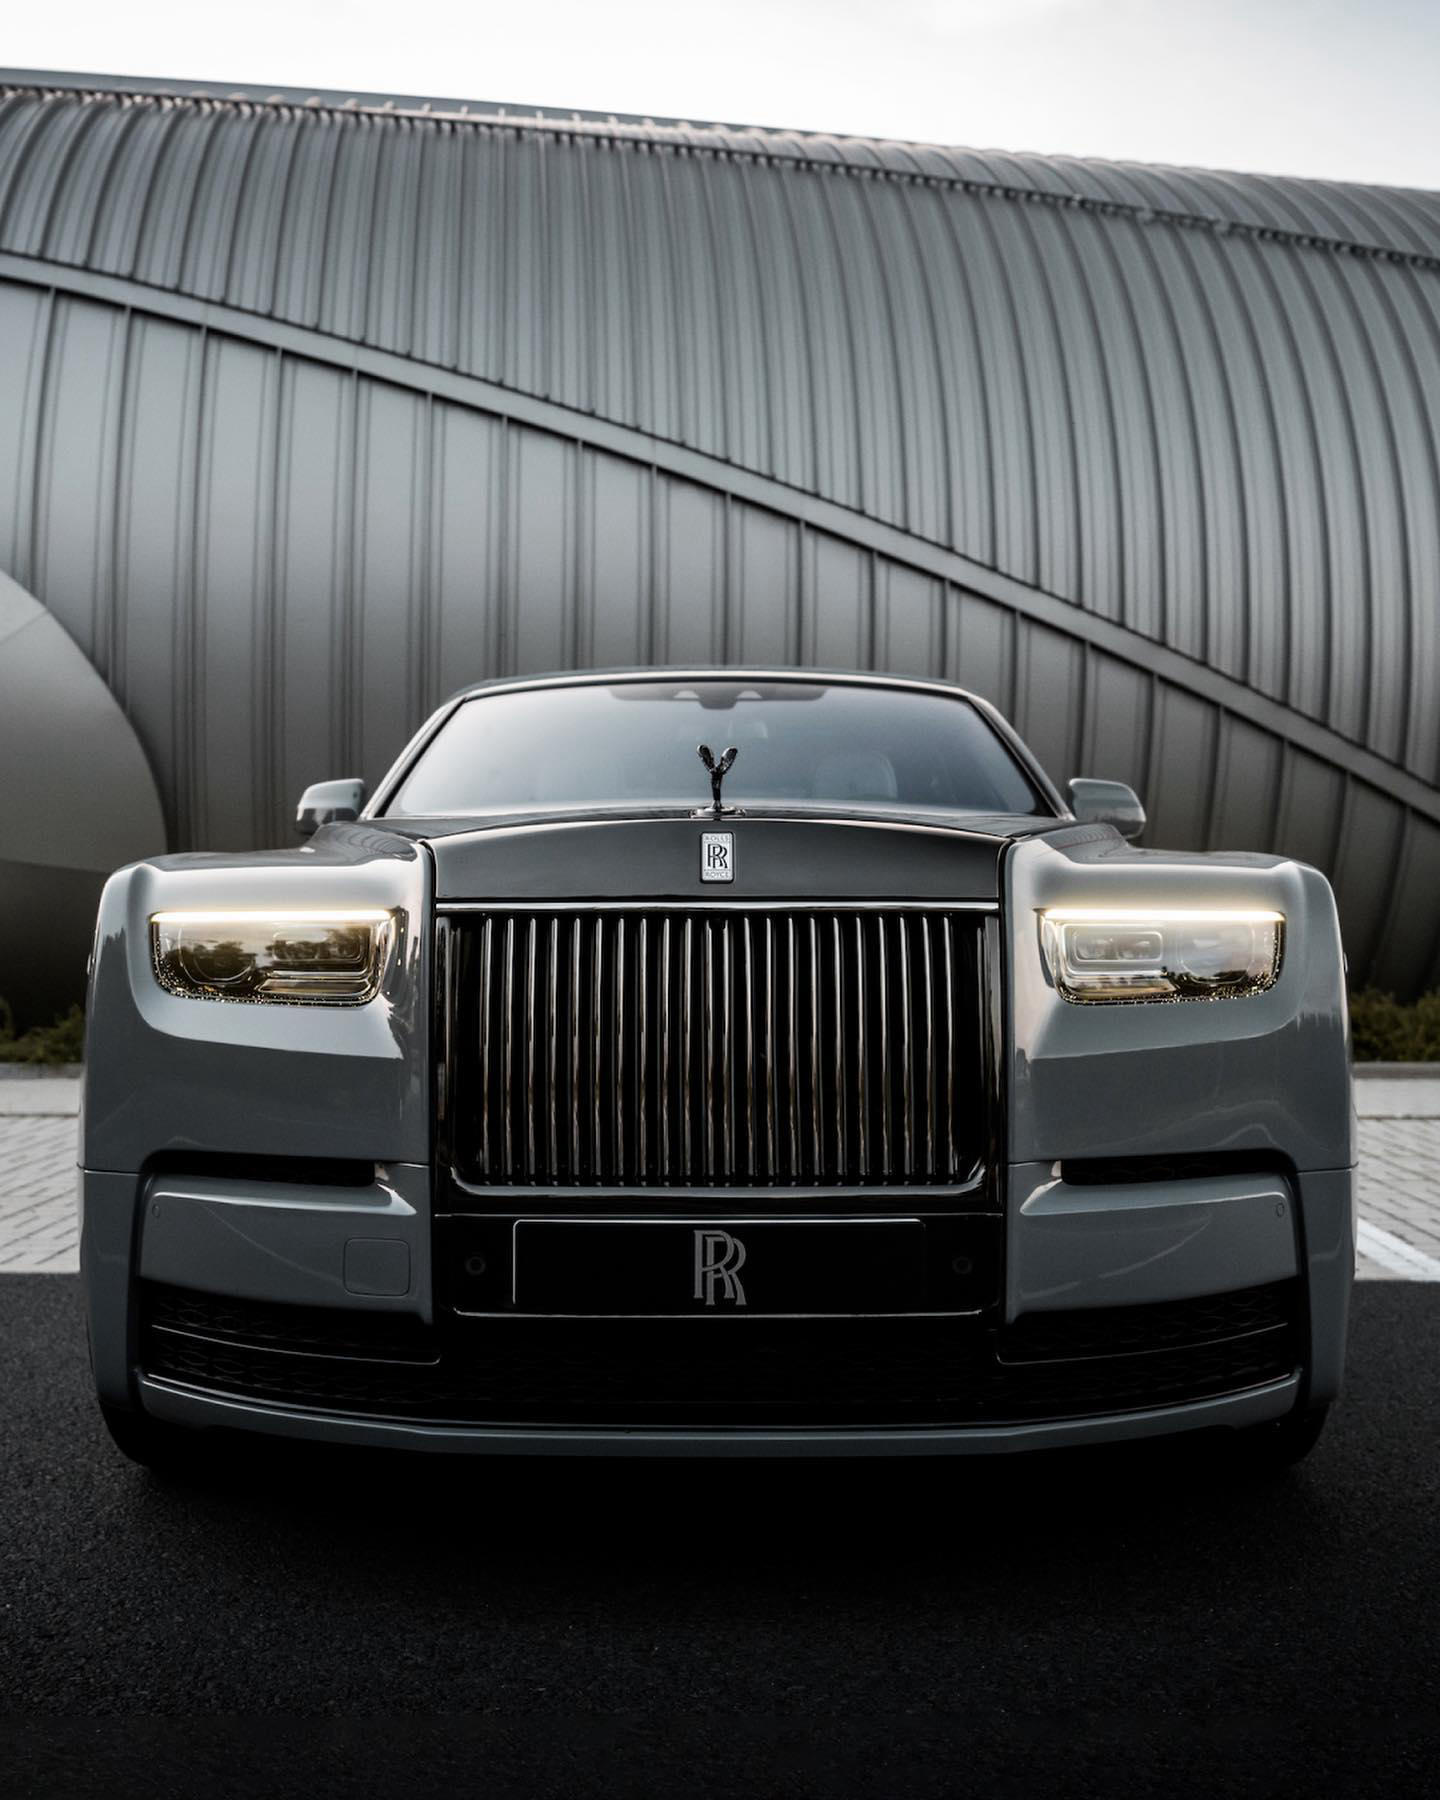 image  1 The Illuminated Grille’s imposing lines bestow Phantom Series II with a commanding facade — one befi